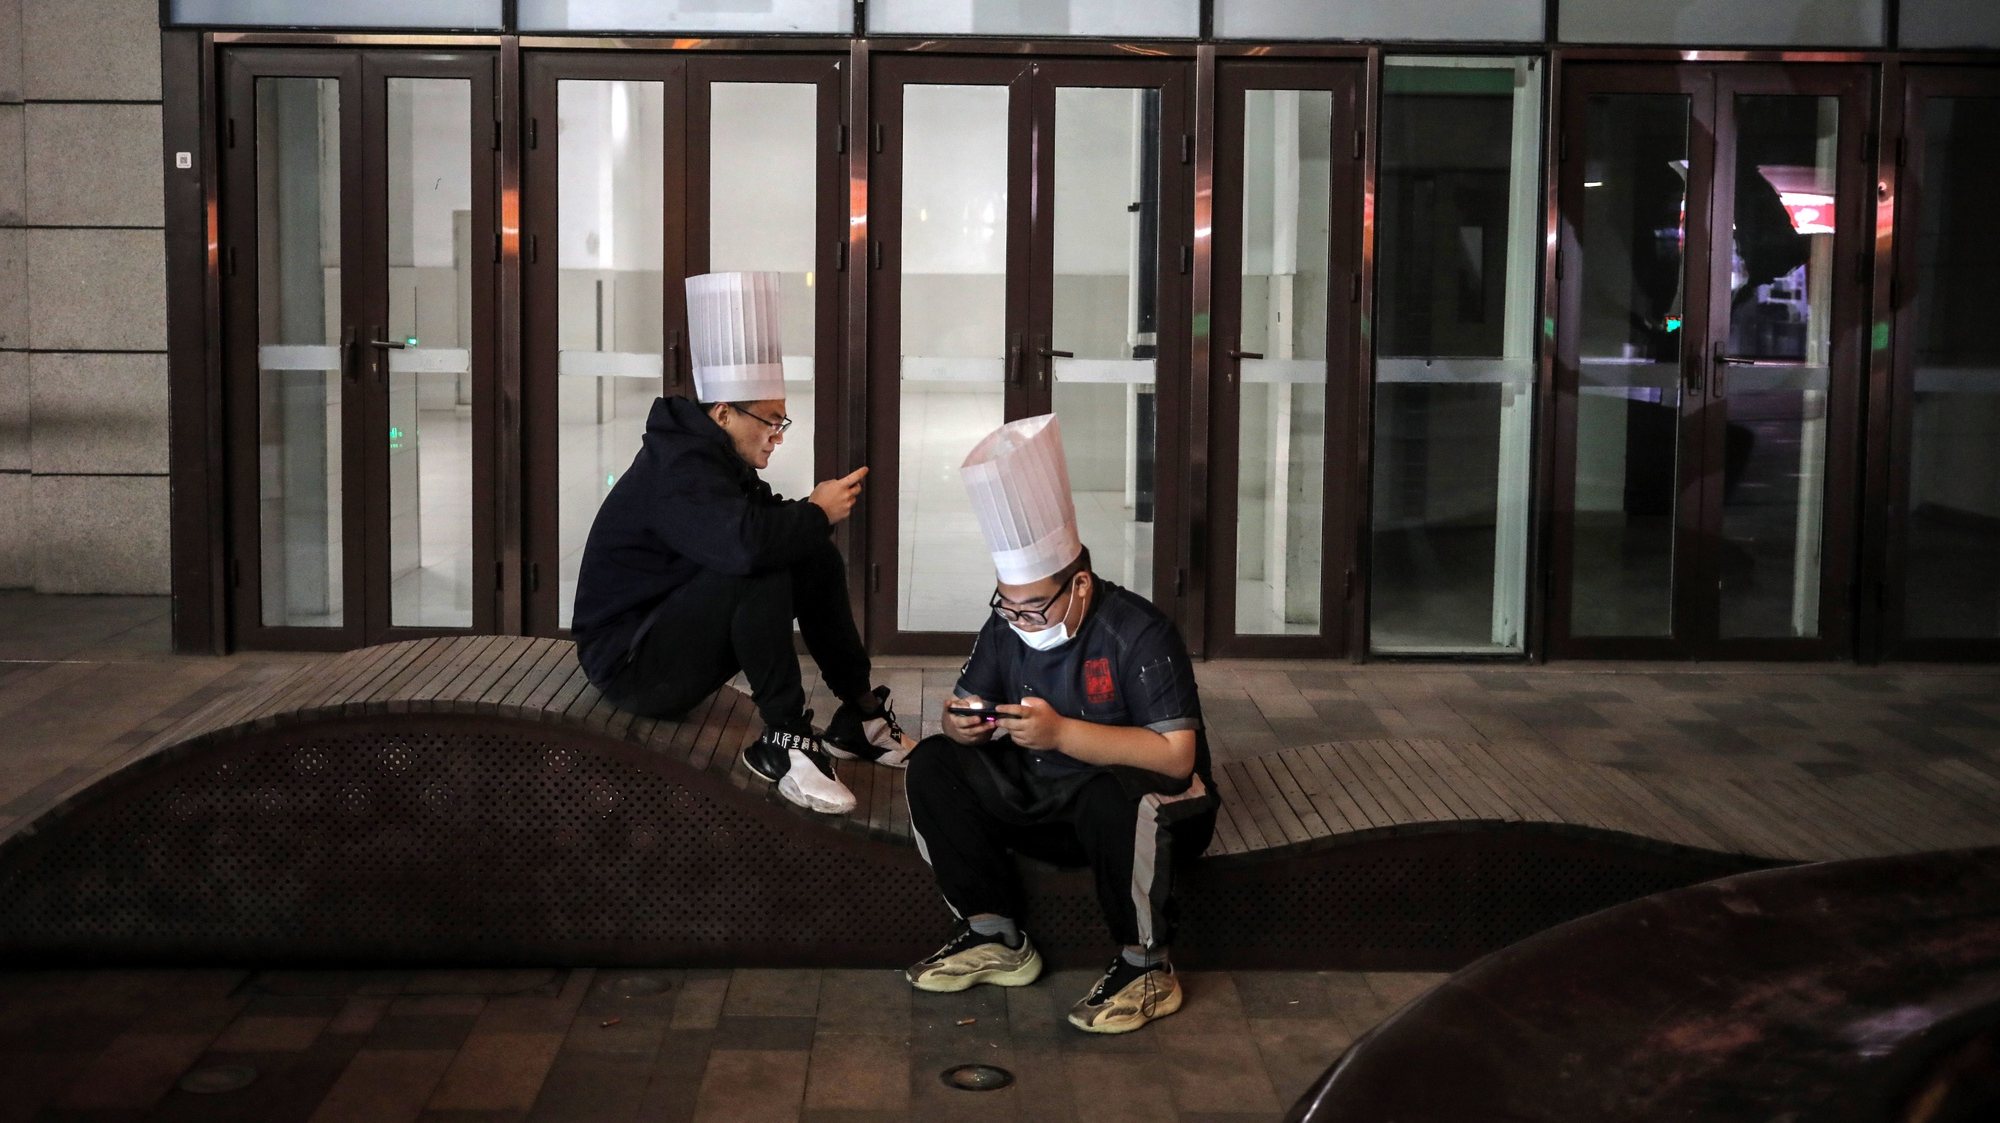 epa08899396 Two chefs use their mobile phones outside a shopping mall in Beijing, China, 22 December 2020.  EPA/WU HONG